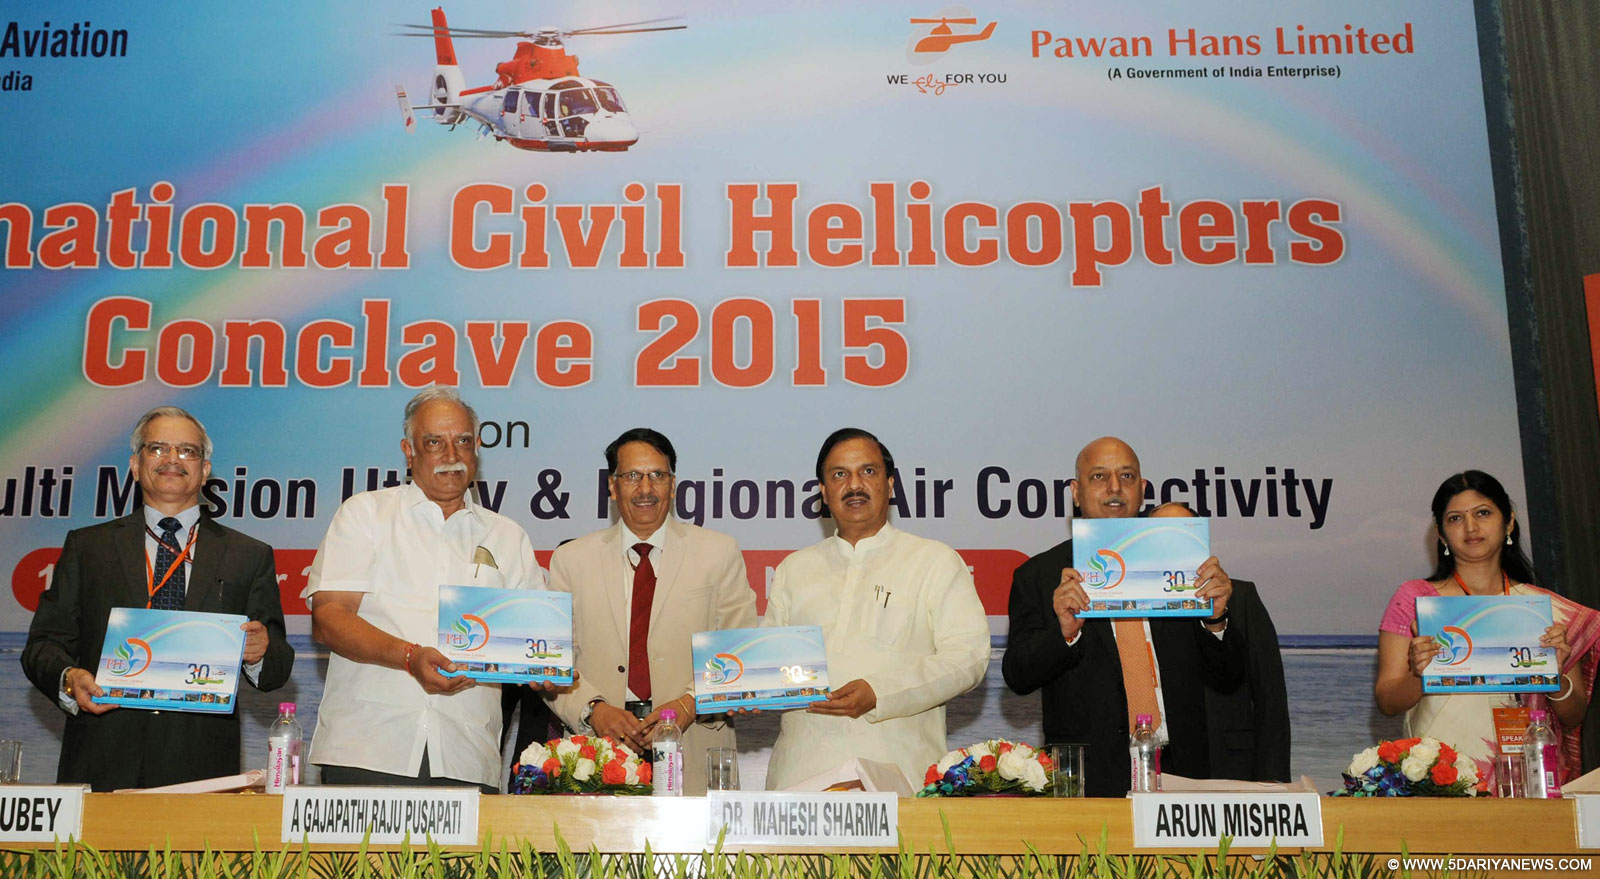 The Union Minister for Civil Aviation, Shri Ashok Gajapathi Raju Pusapati releasing the Pawan Hans Coffee table book, at the inauguration of the International Civil Helicopters Conclave 2015, in New Delhi on October 16, 2015. The Minister of State for Culture (Independent Charge), Tourism (Independent Charge) and Civil Aviation, Dr. Mahesh Sharma, the Secretary, Ministry of Civil Aviation, Shri R.N. Choubey and other dignitaries are also seen. 